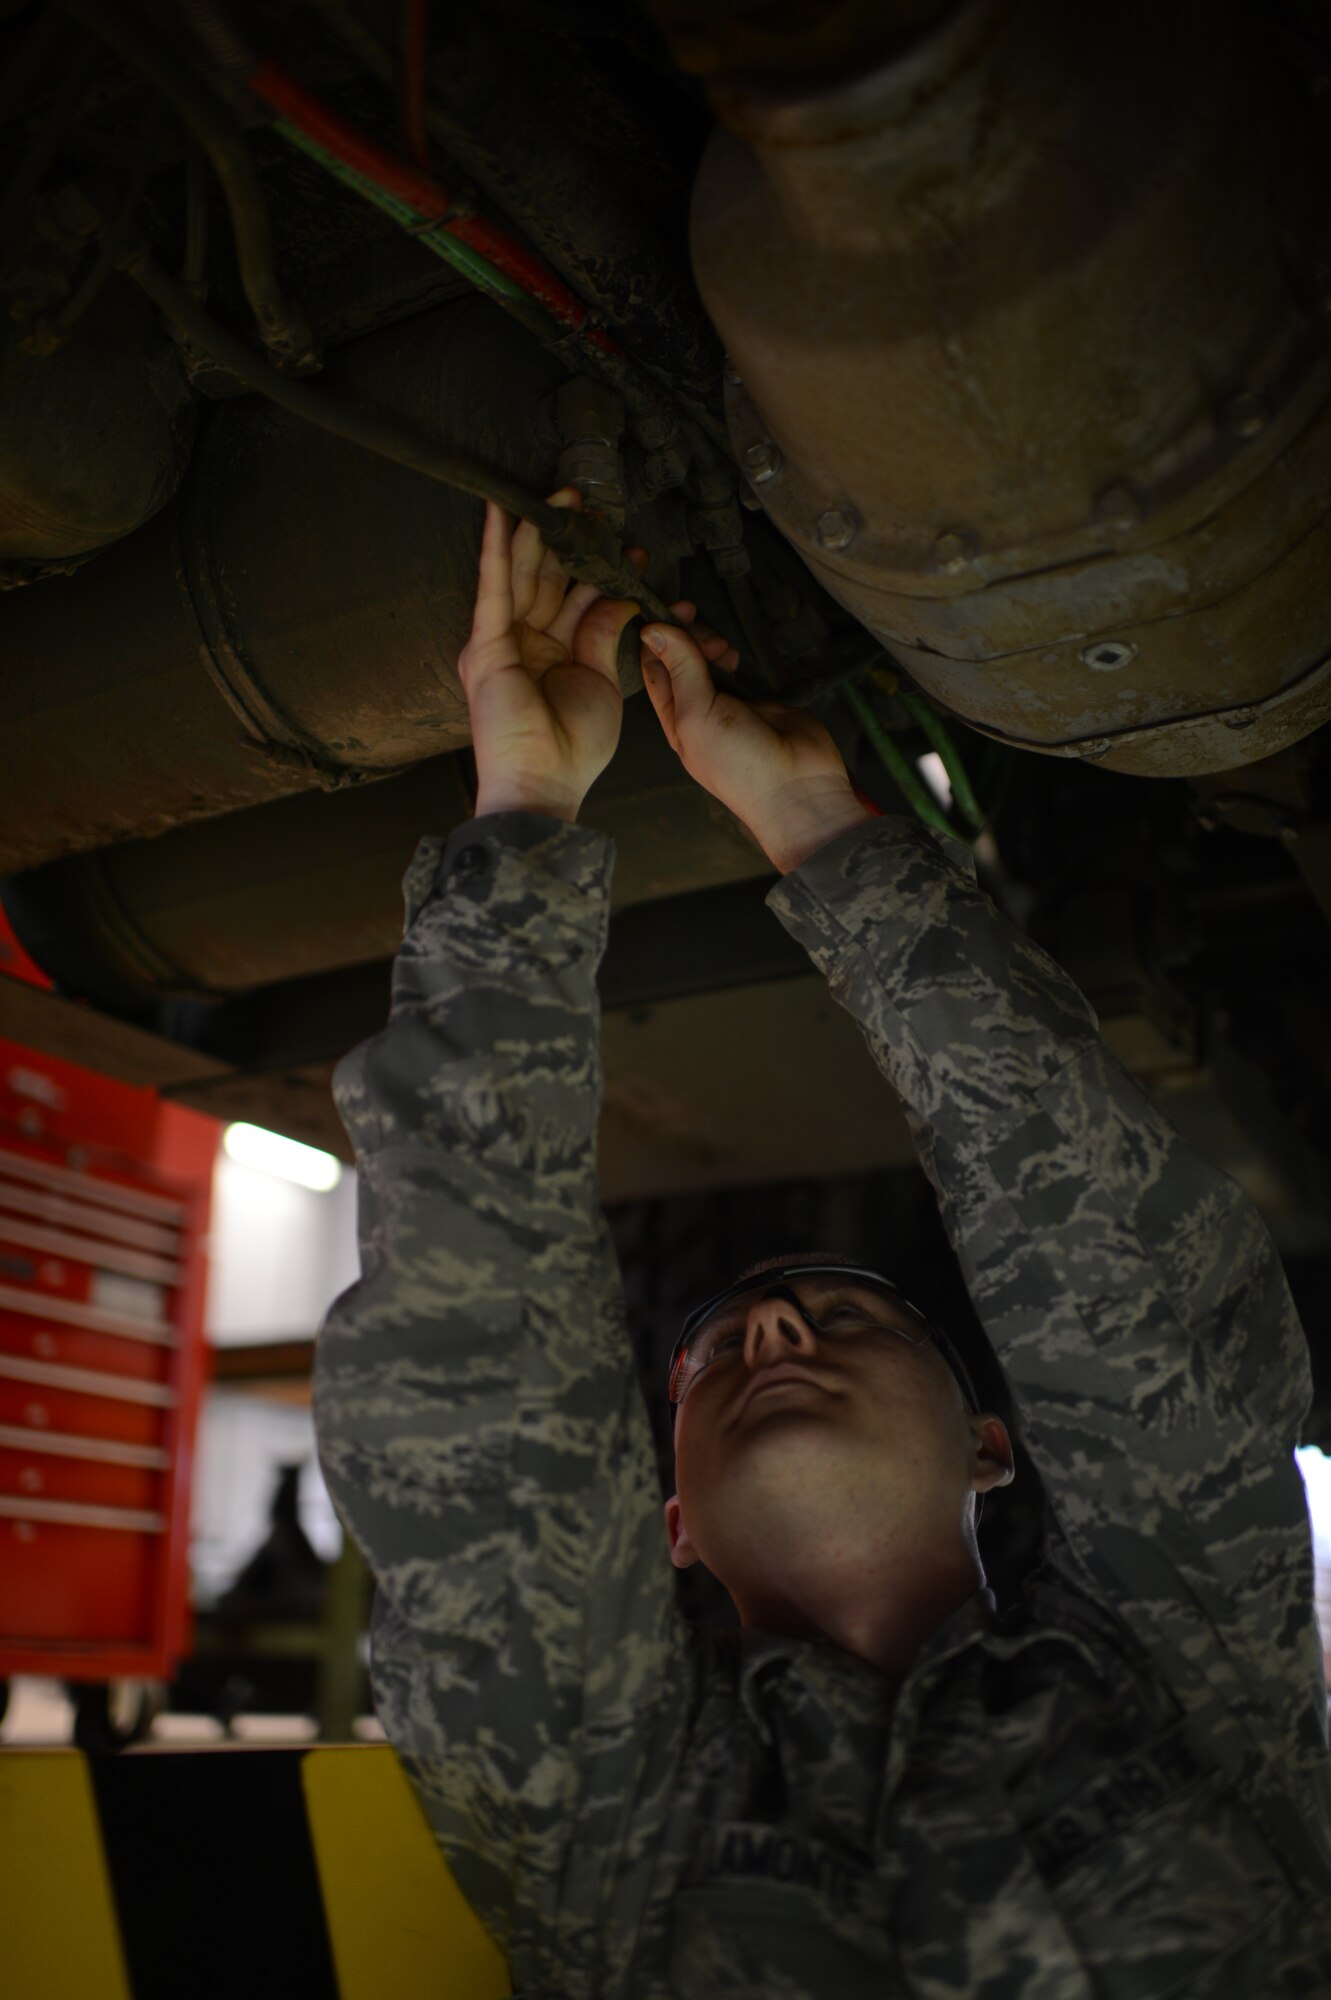 U.S. Air Force Staff Sgt. Michael Lamonte, 606th Air Control Squadron vehicle maintenance technician from Burlington, Calif., checks the air lines of a five-ton troop carrier vehicle on Spangdahlem Air Base, Germany, Feb. 21, 2014. The air lines are checked for leaks during maintenance to ensure proper function of the vehicle. (U.S. Air Force photo by Senior Airman Gustavo Castillo/Released)